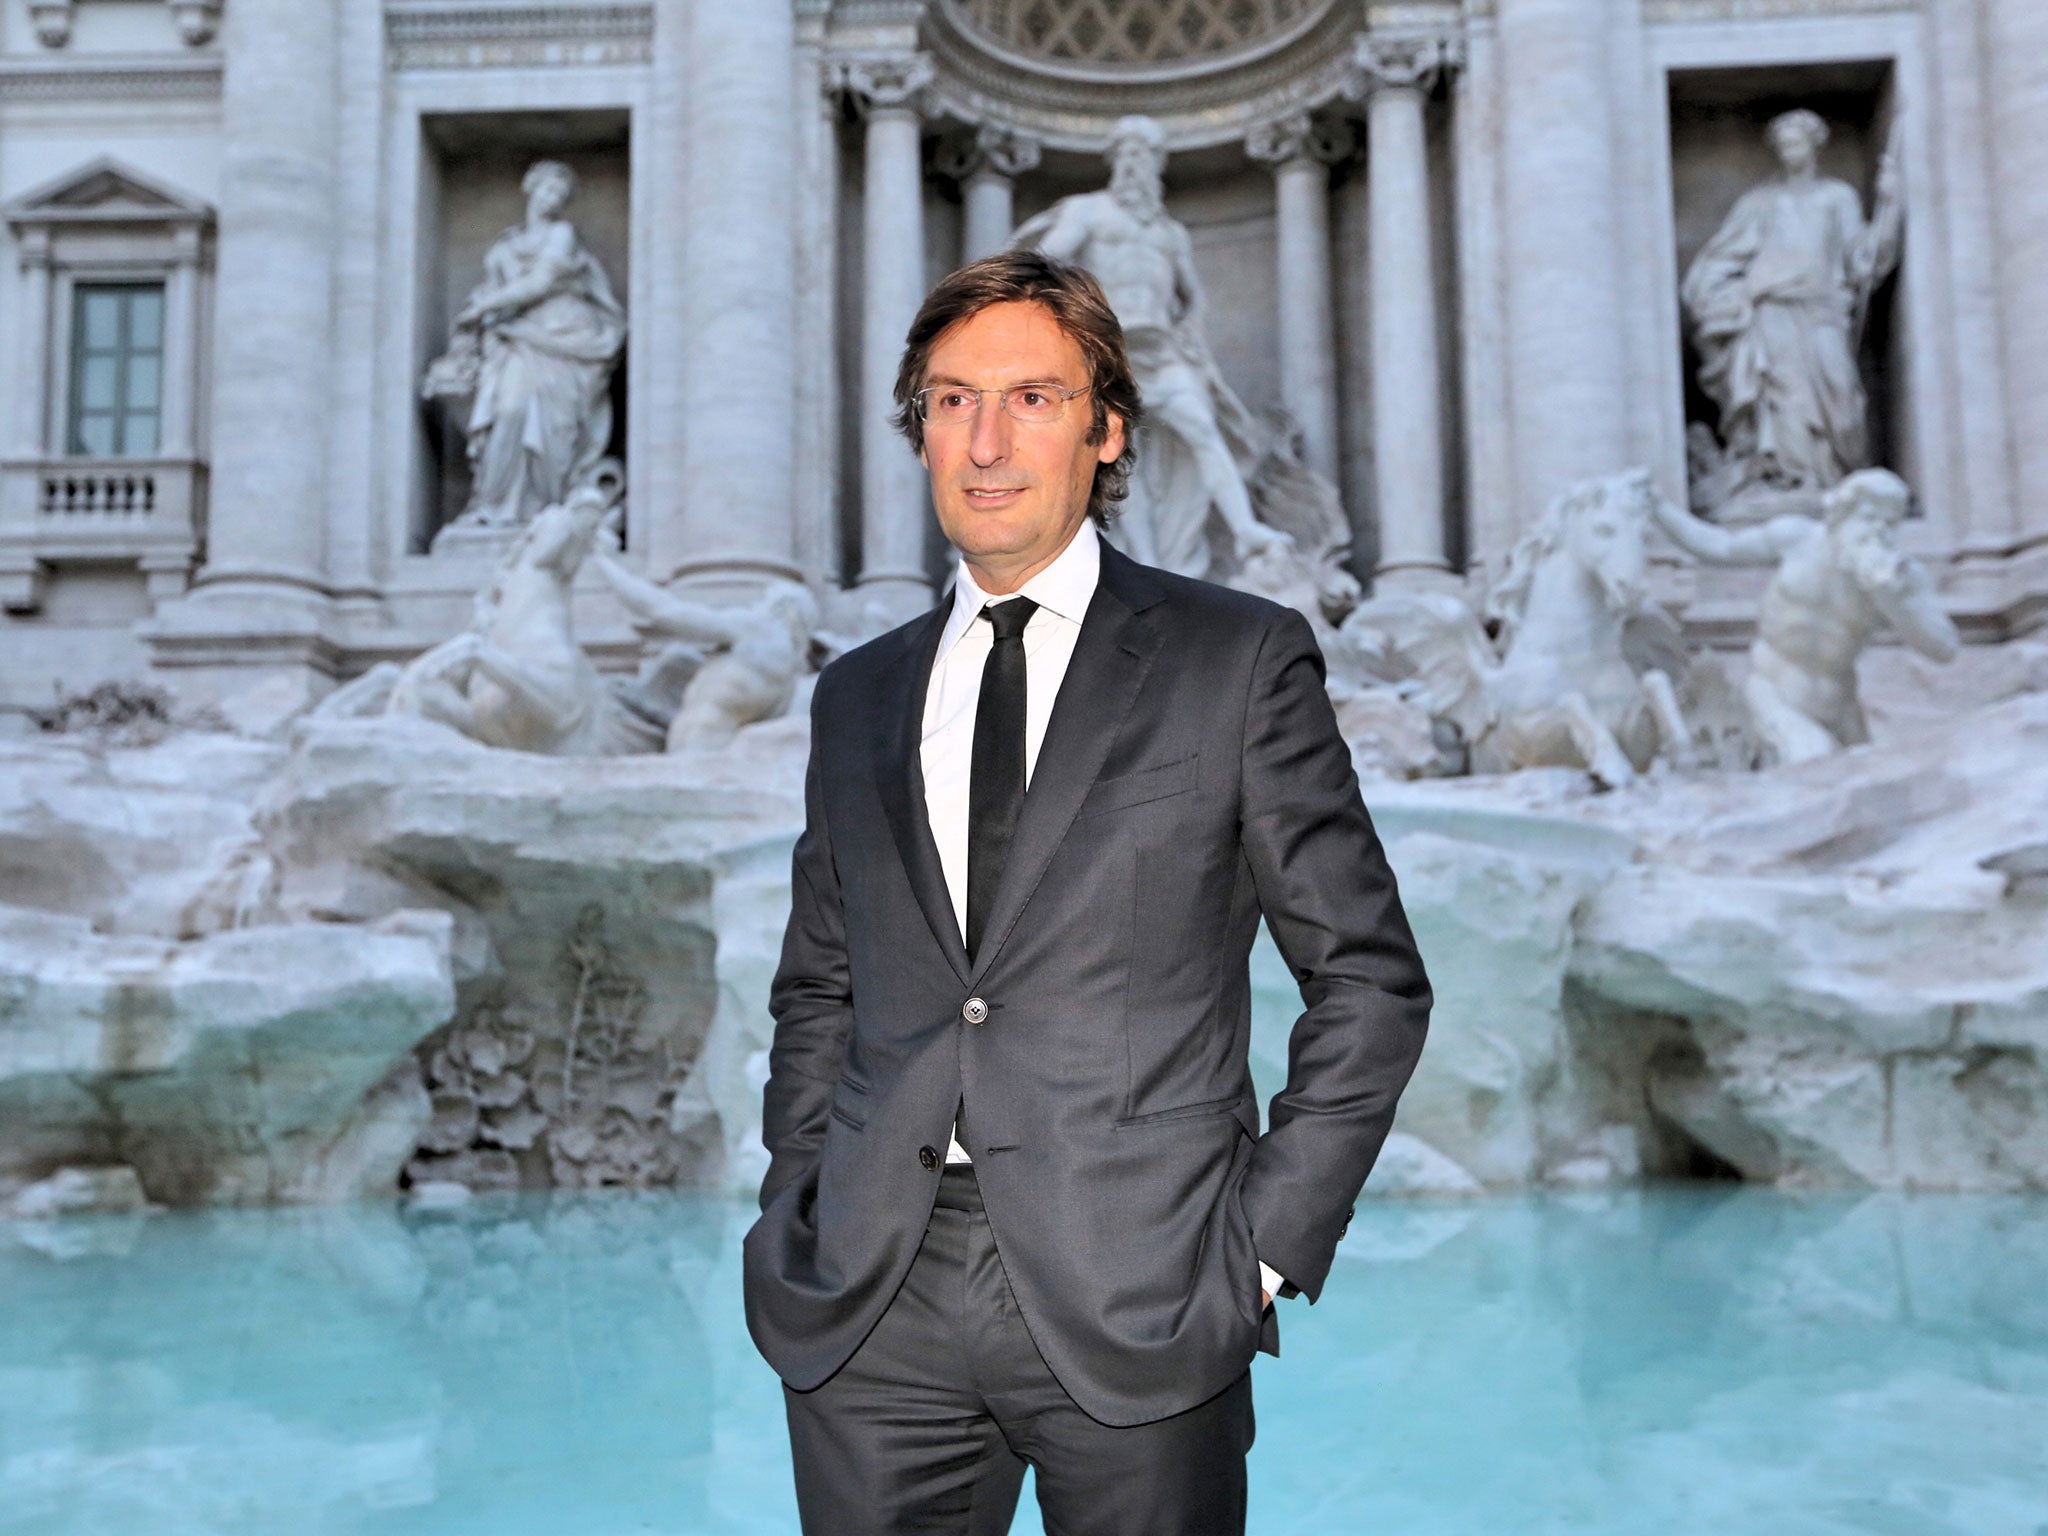 Pietro Beccari at the Trevi fountain, which Fendi is helping to restore